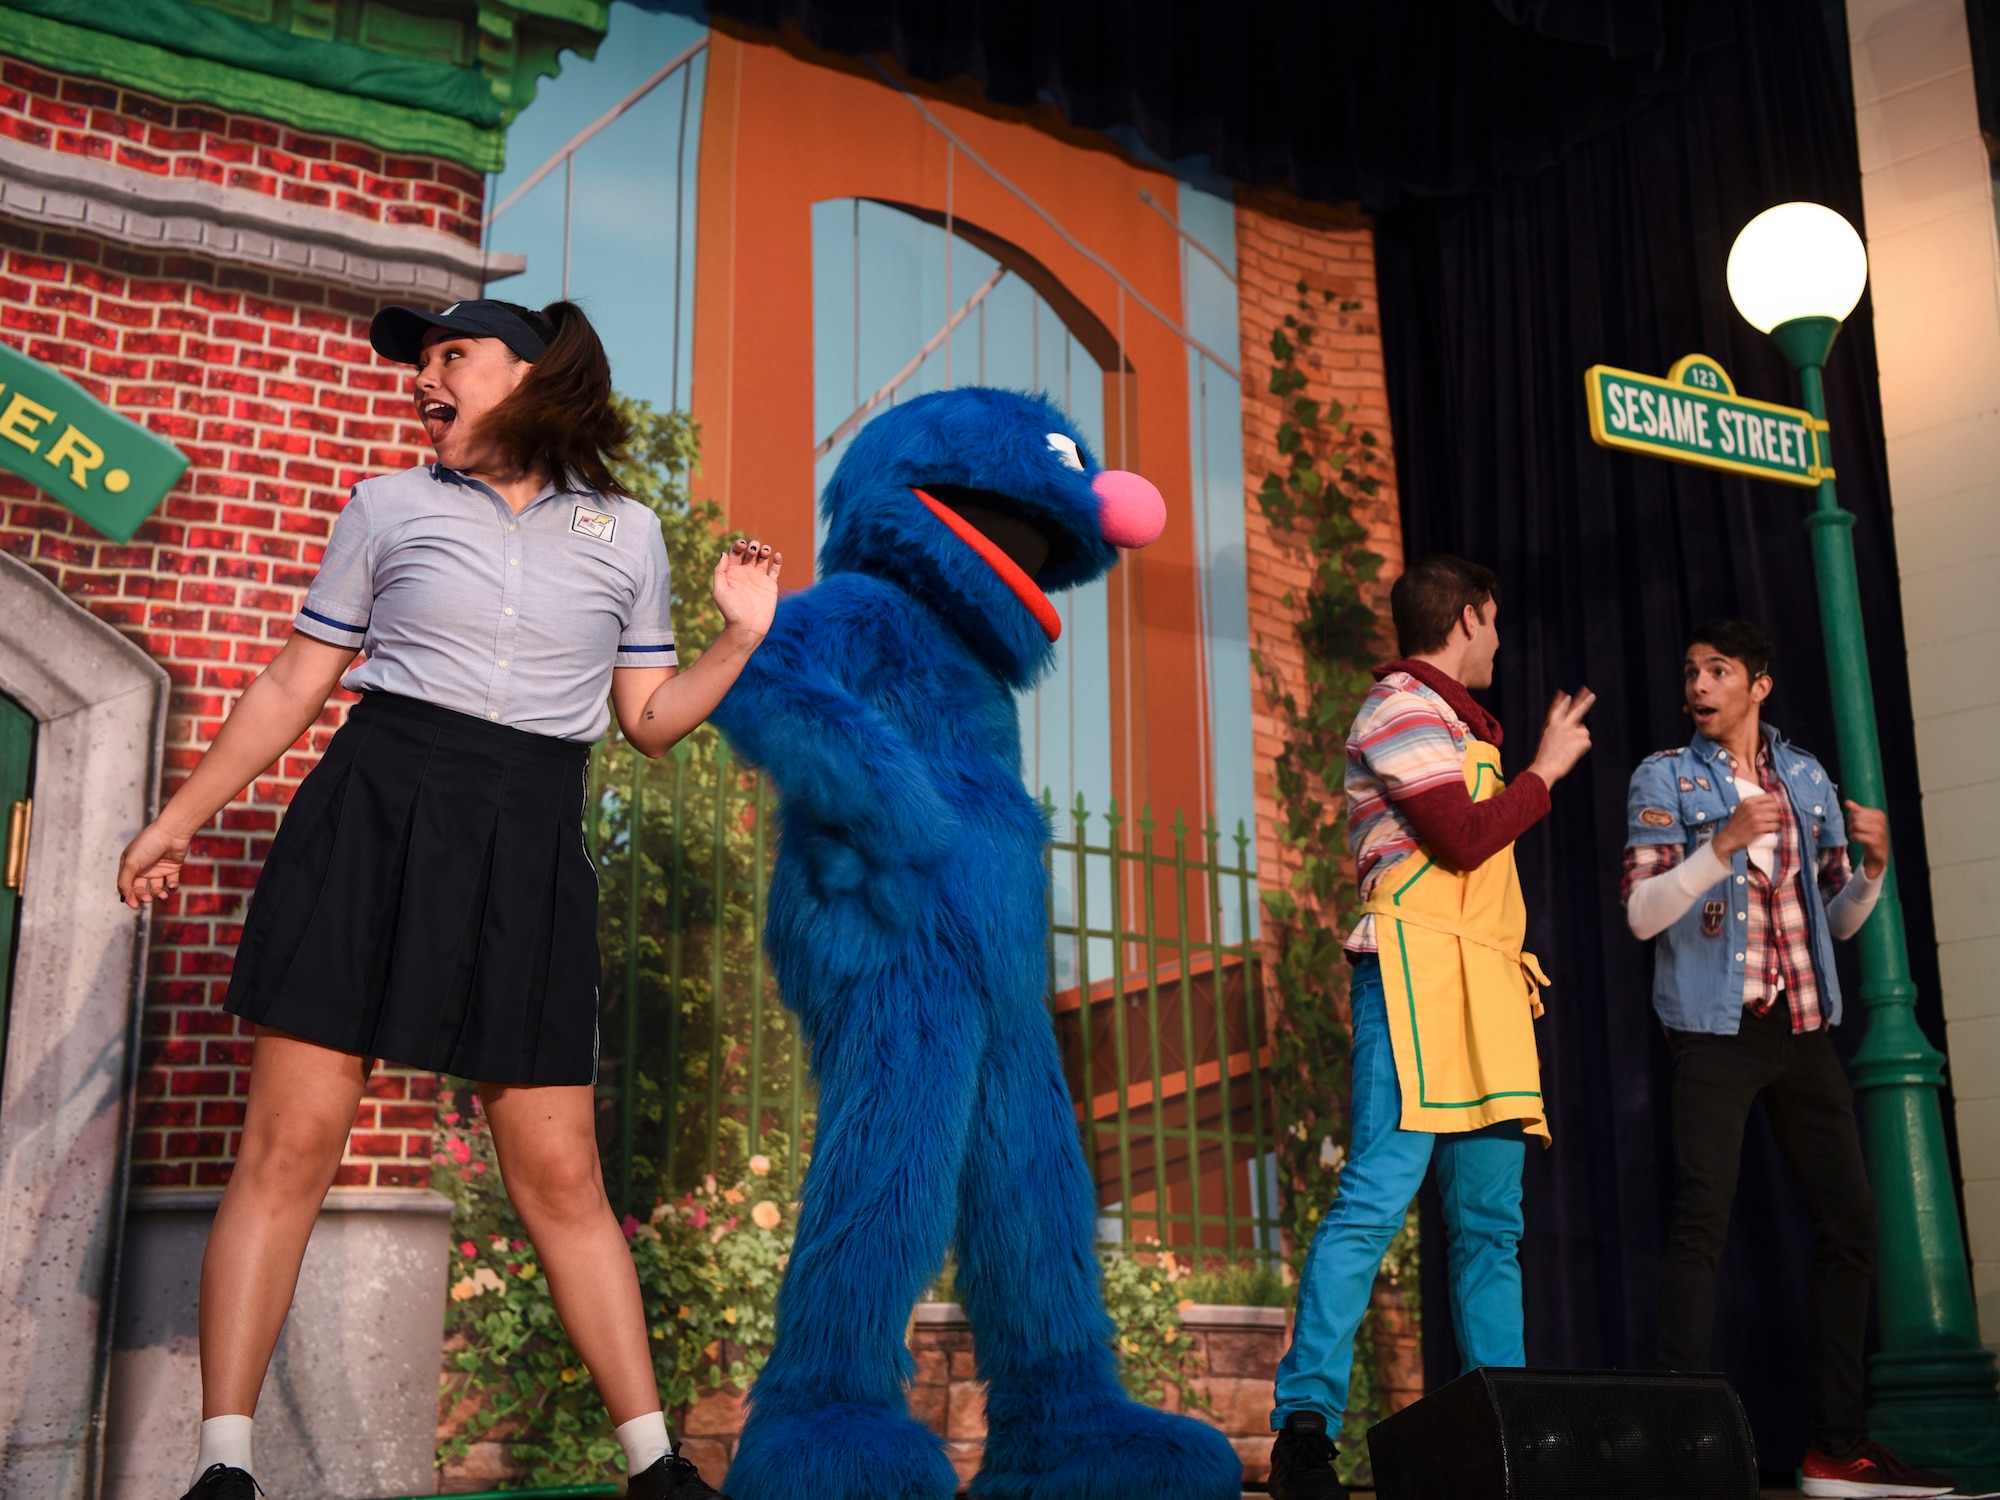 The cast of Sesame Street Live perform a song and dance routine for military families March 26, 2019, on Grand Forks Air Force Base, North Dakota. The performance was themed around community engagement and kindness, and taught children how to keep their communities clean and safe, along with lessons consisting of kindness and sharing. (U.S. Air Force photo by Airman 1st Class Melody Wolff).